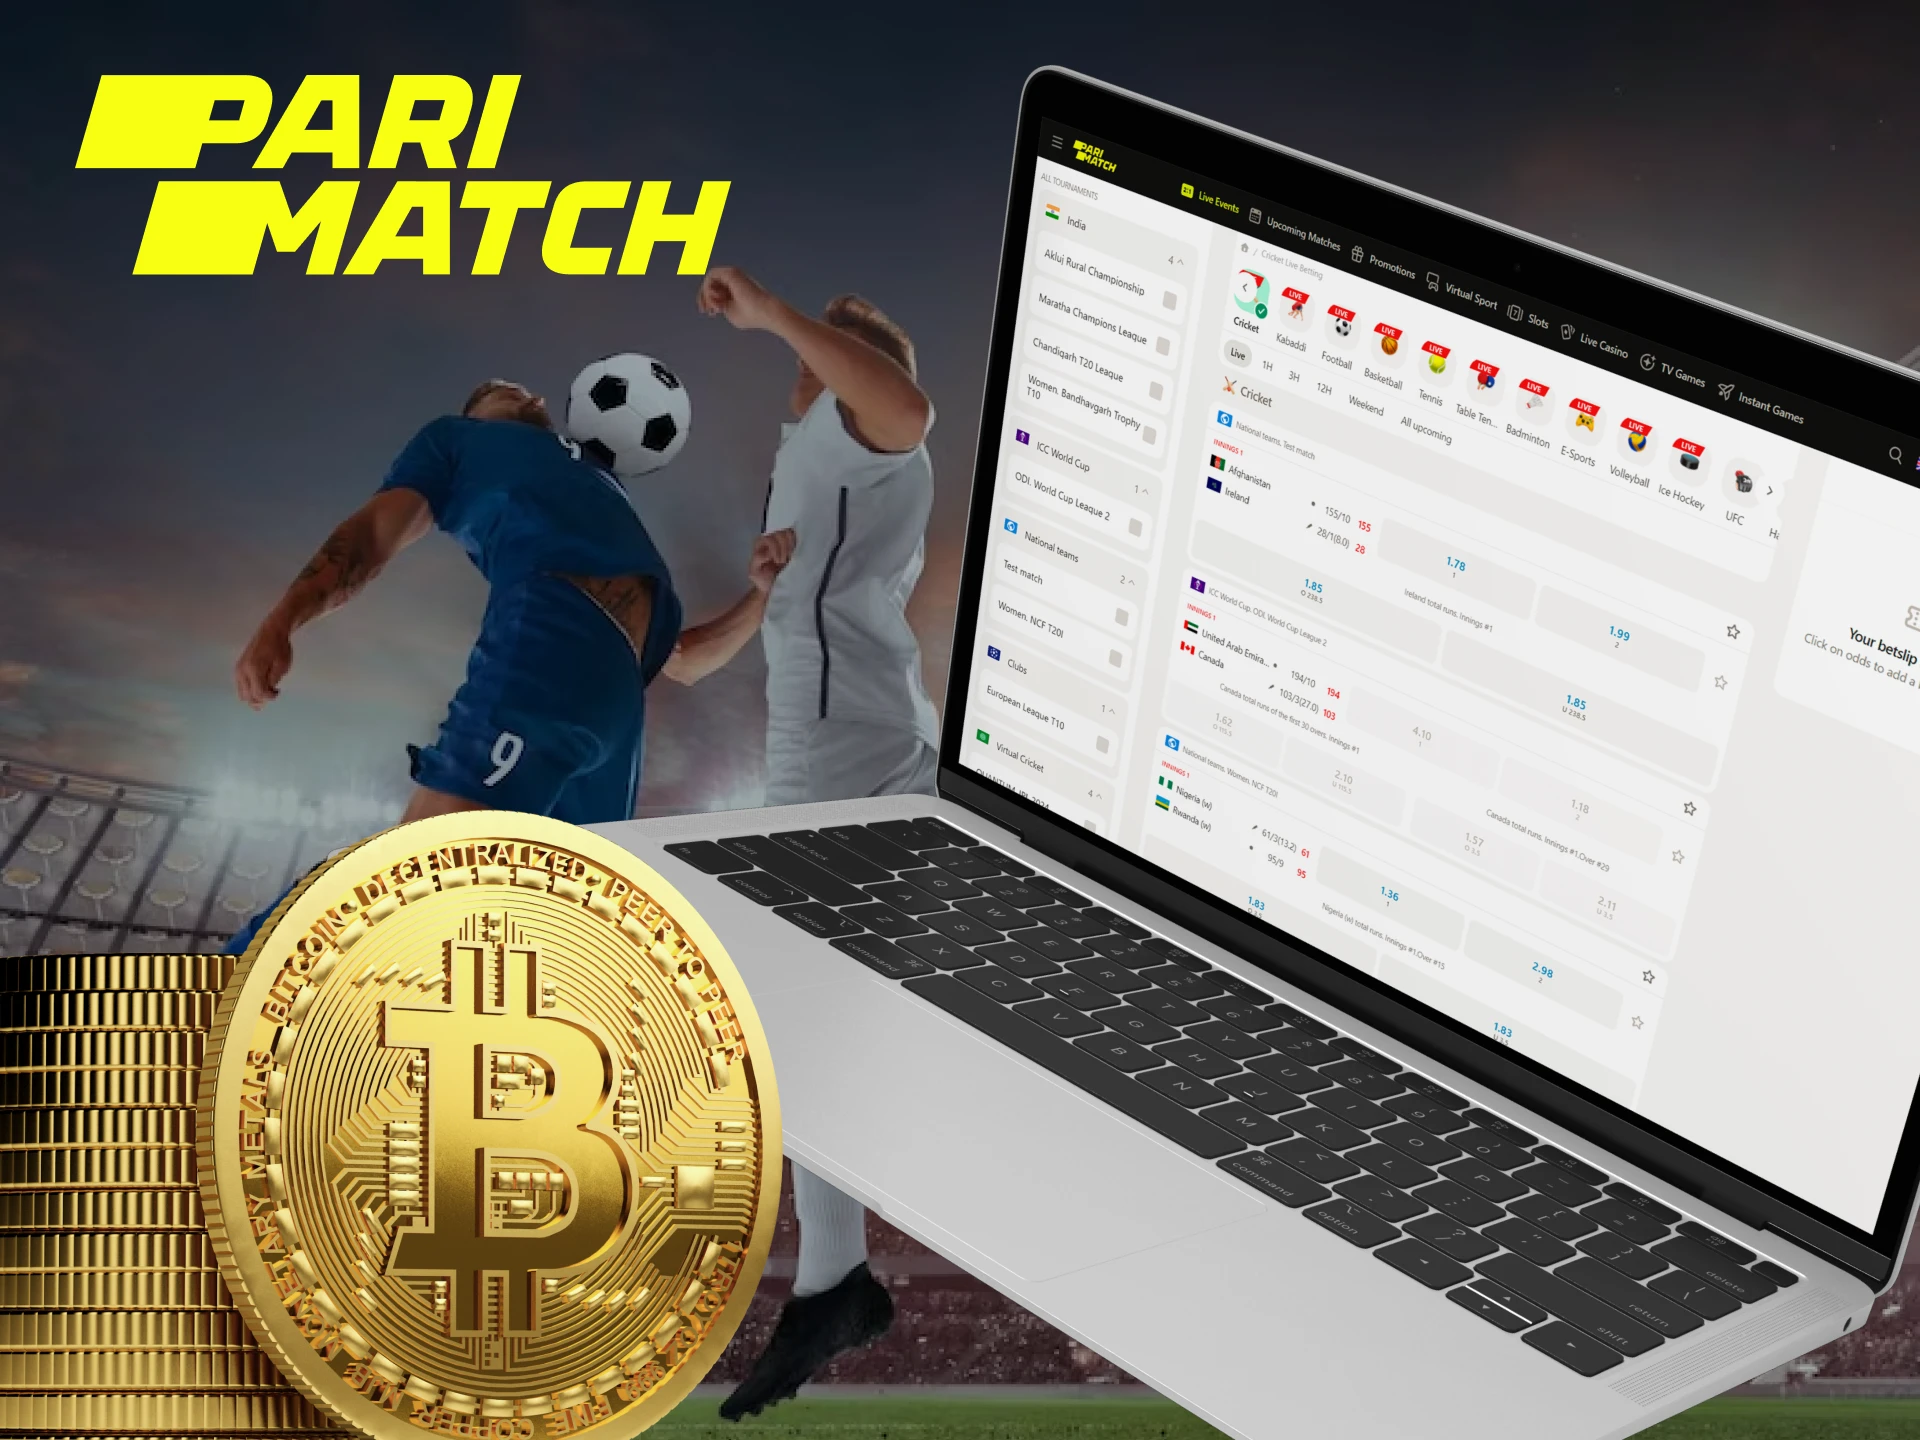 Parimatch is the best bookmaker for betting using cryptocurrency.